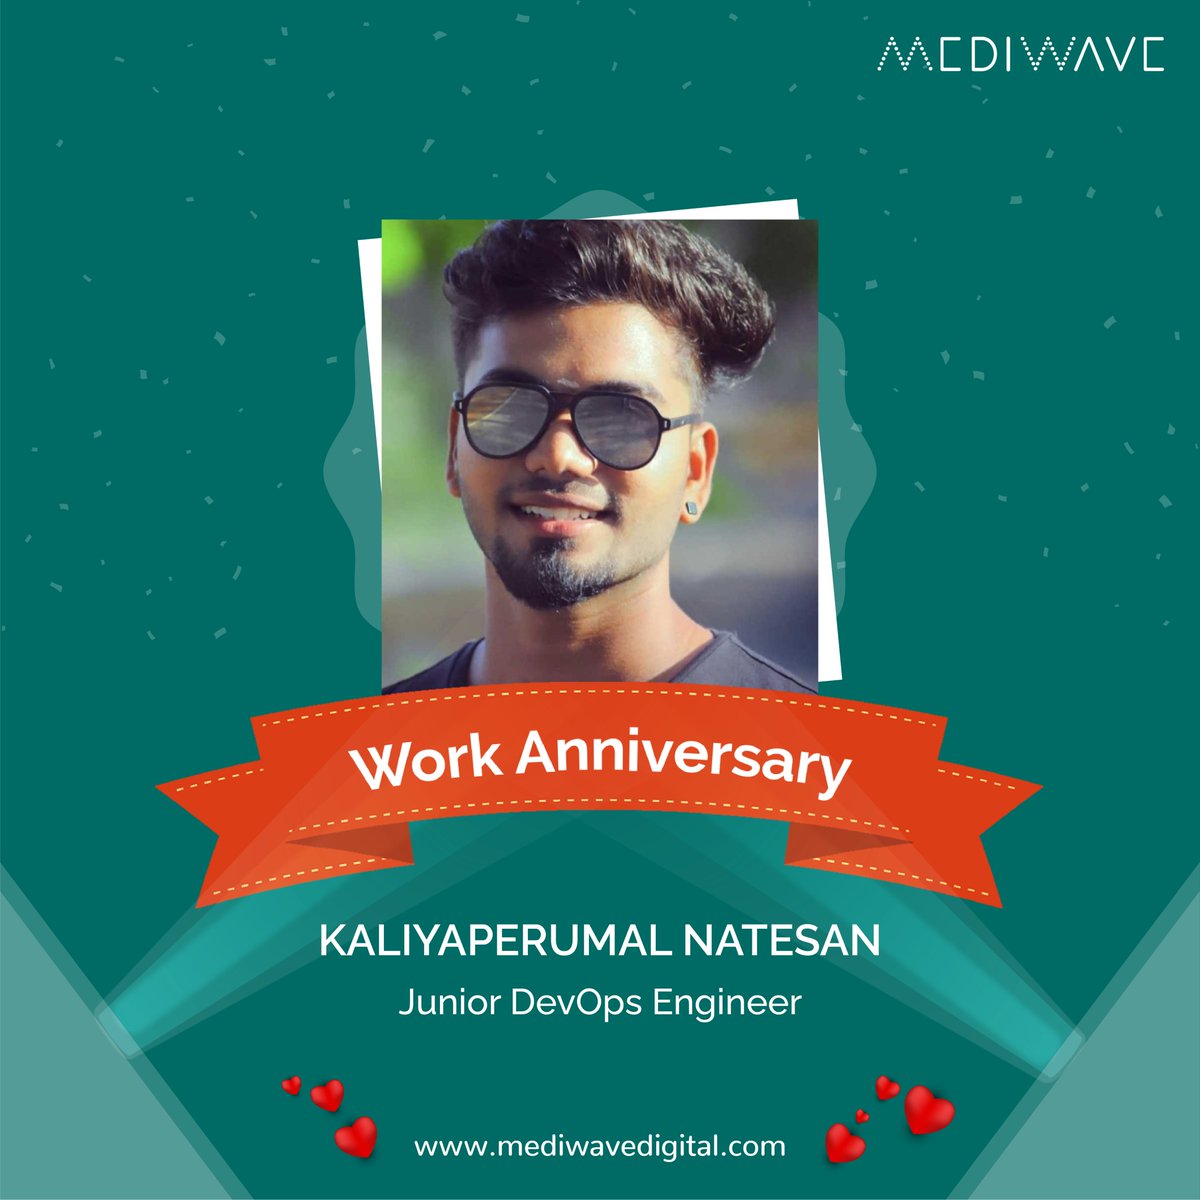 Congratulations on reaching another milestone in your career. Happy work anniversary Kaliyaperumal!! 🥳🎊🌟🎉 

#WorkAnniversary #careermilestone #DevOps #mediwavedigital